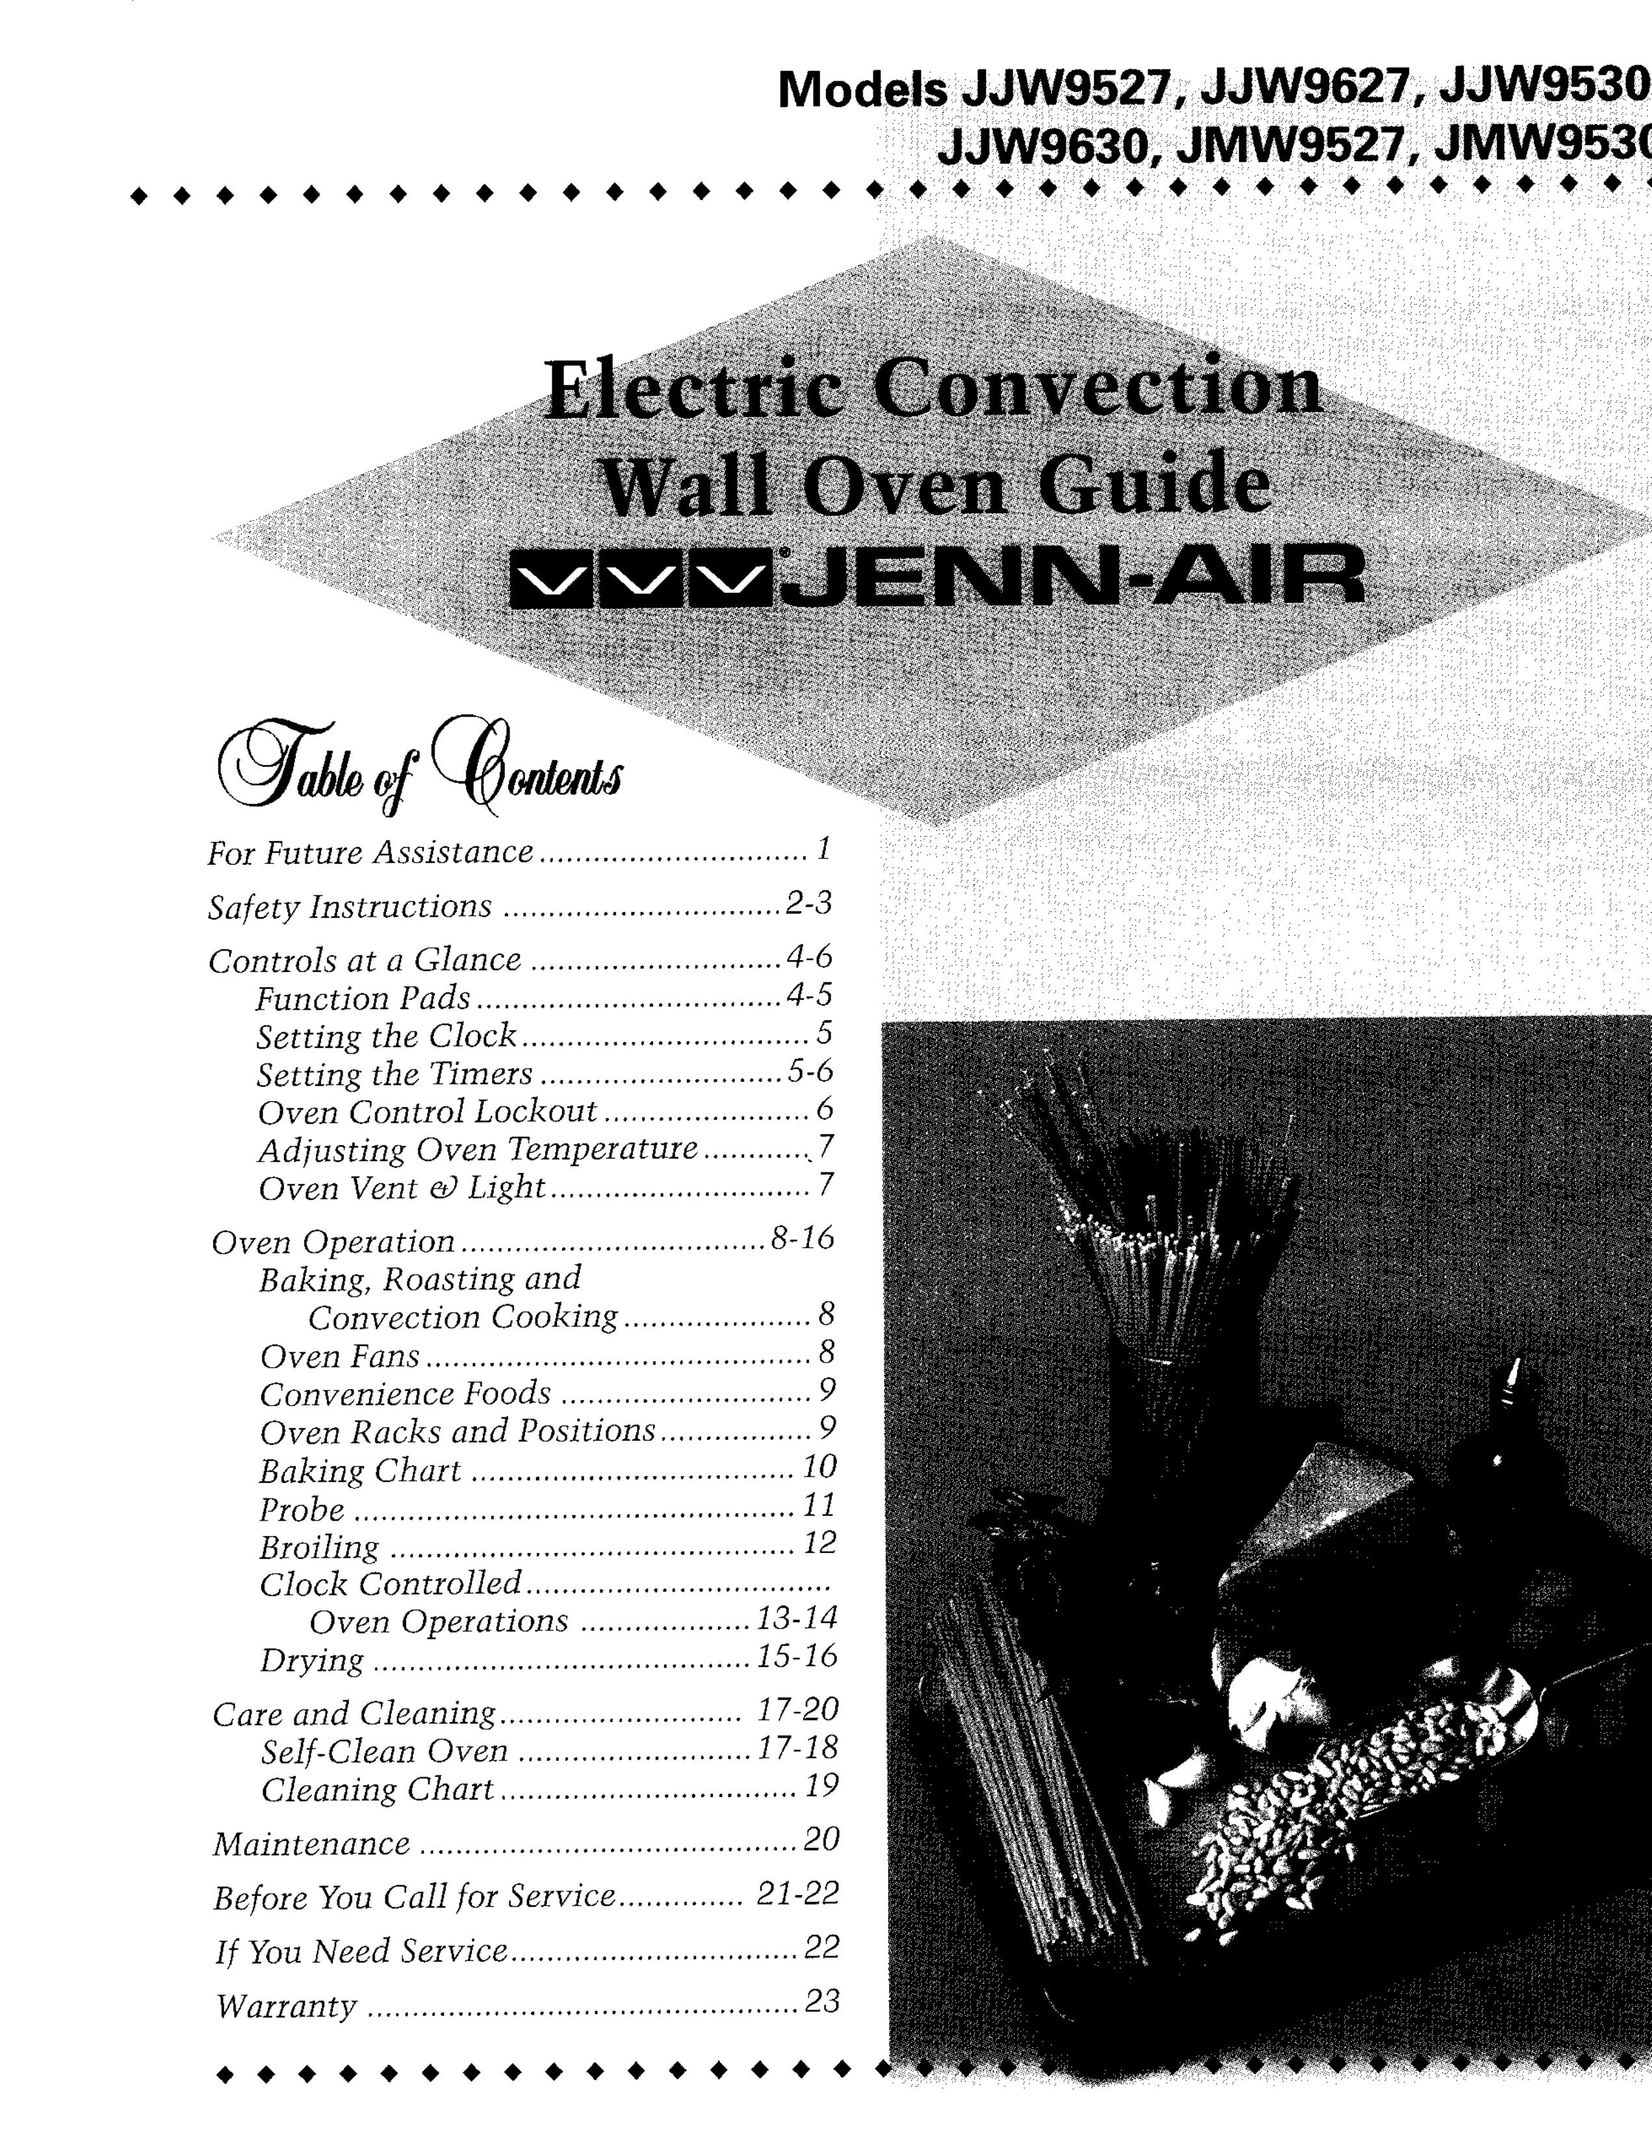 Jenn-Air 81t2P180_60 Convection Oven User Manual